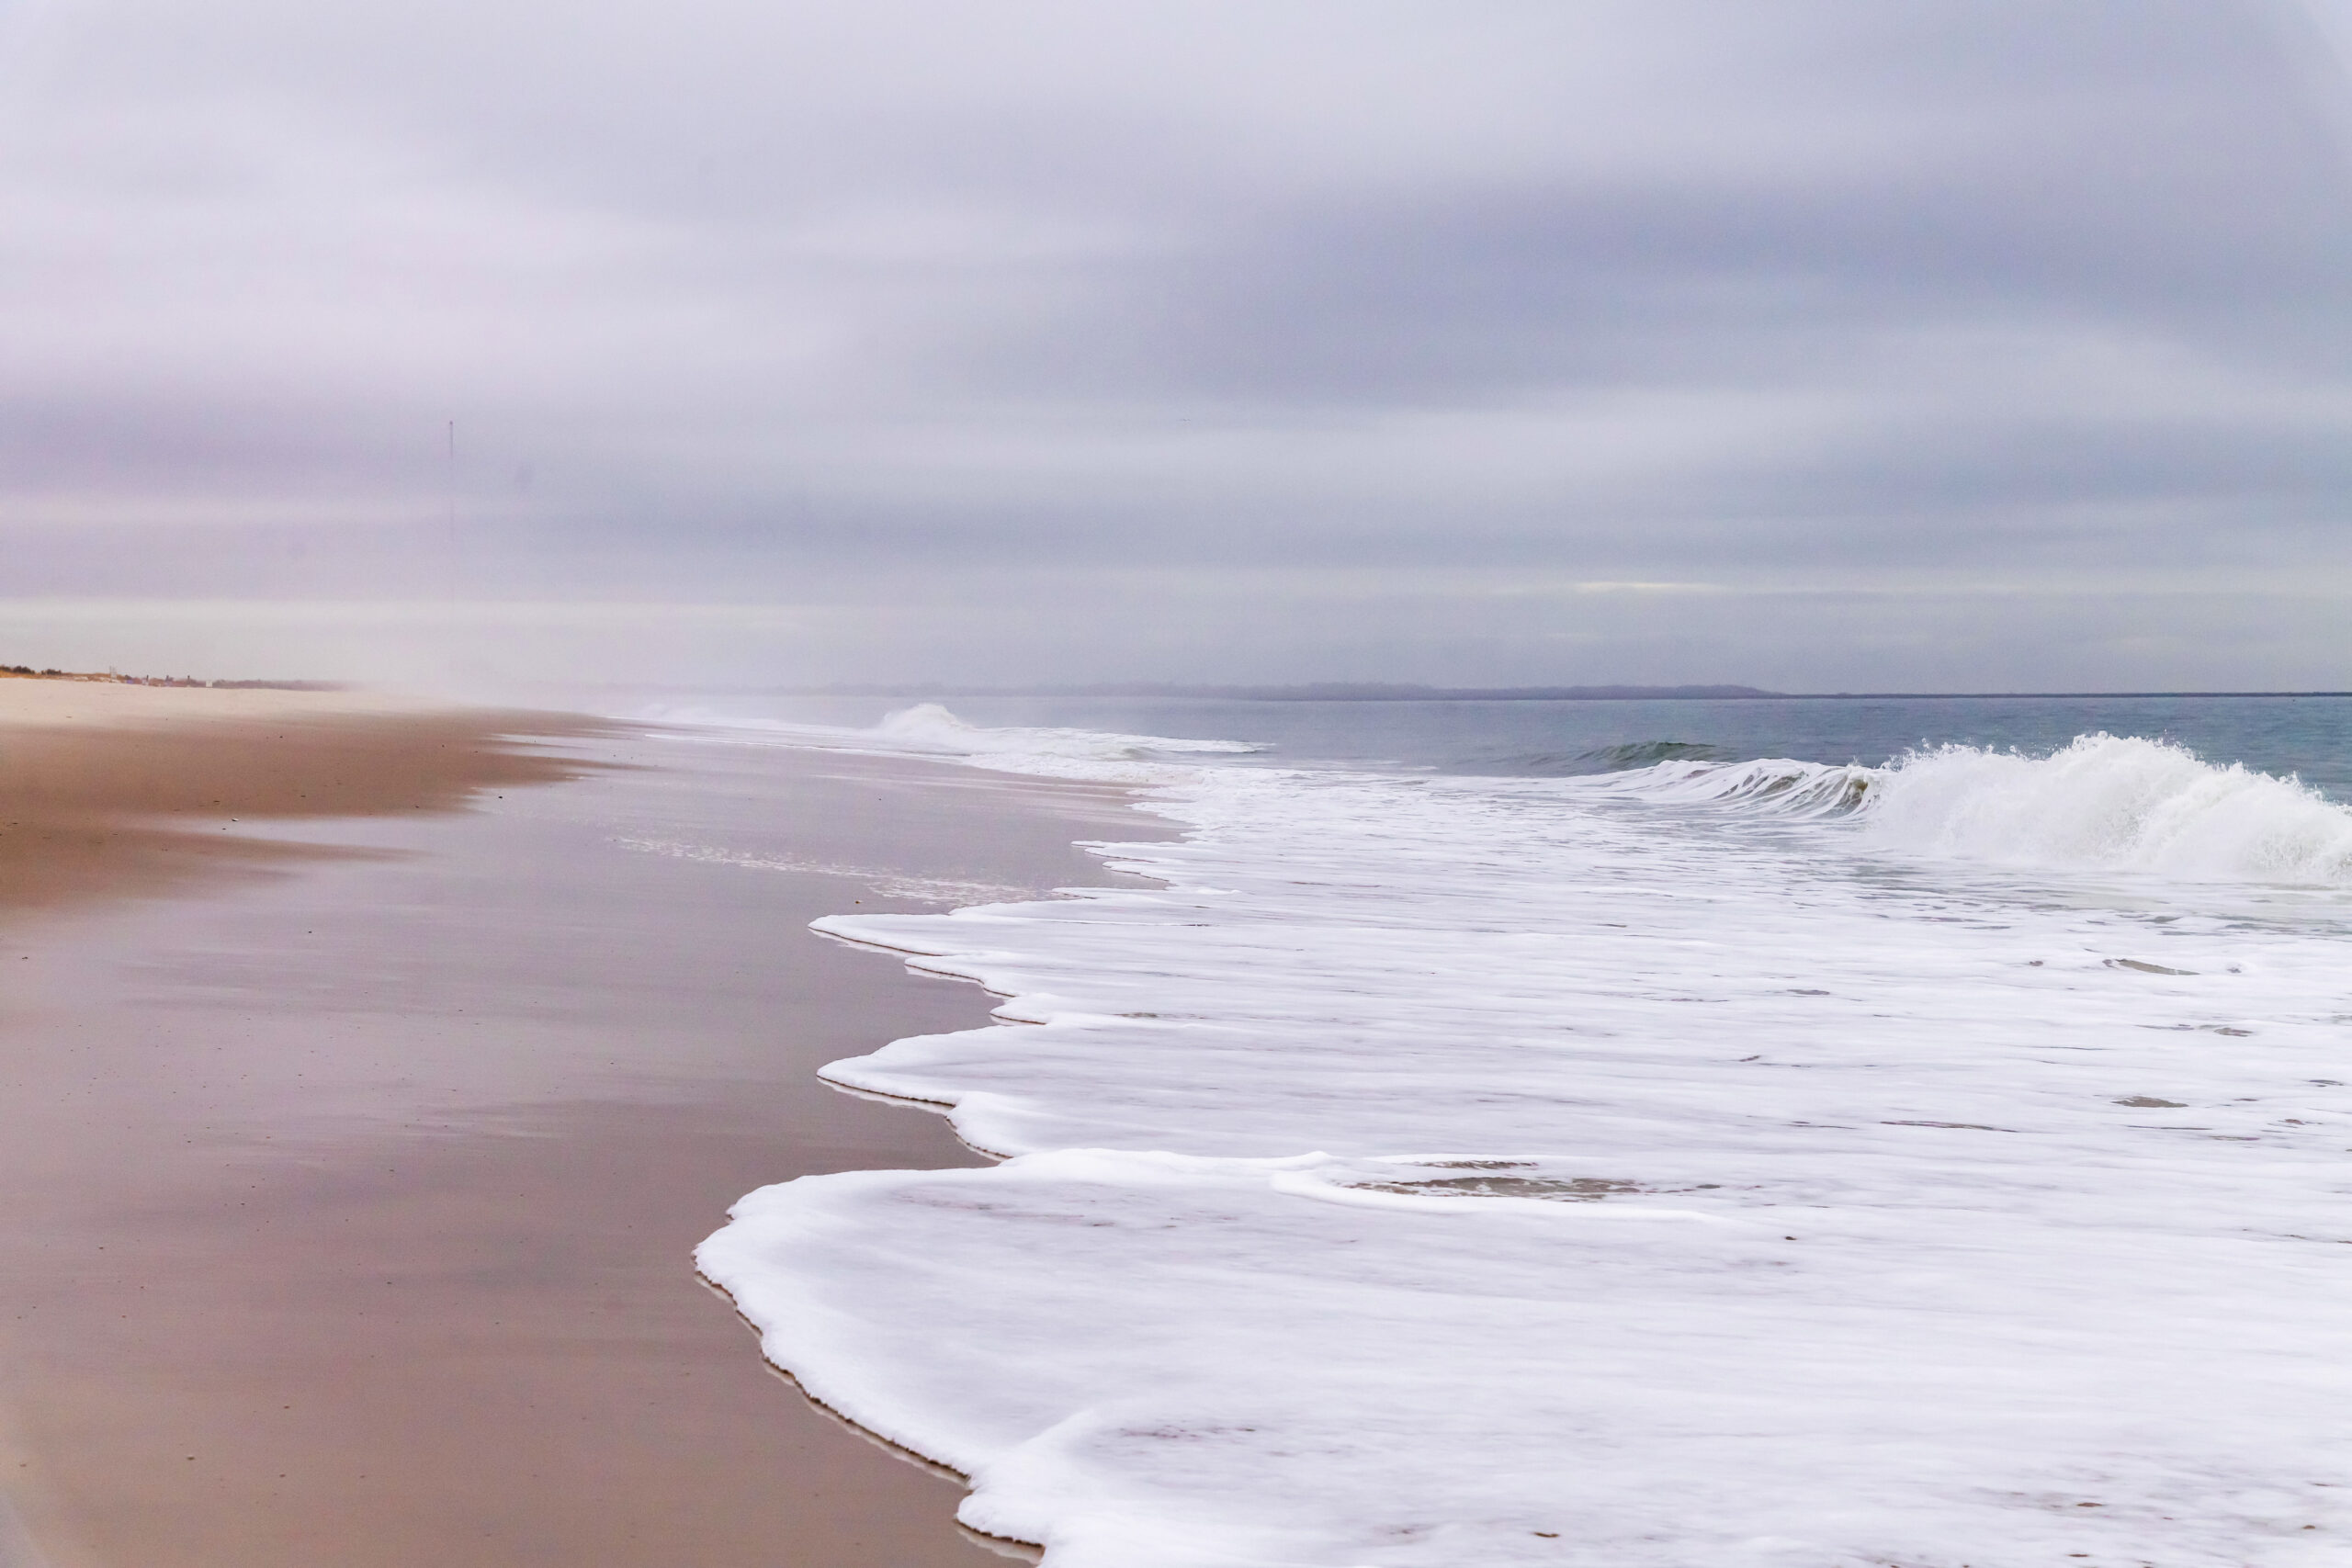 The ocean rushing into the beach with a cloudy sky and fog in the distance